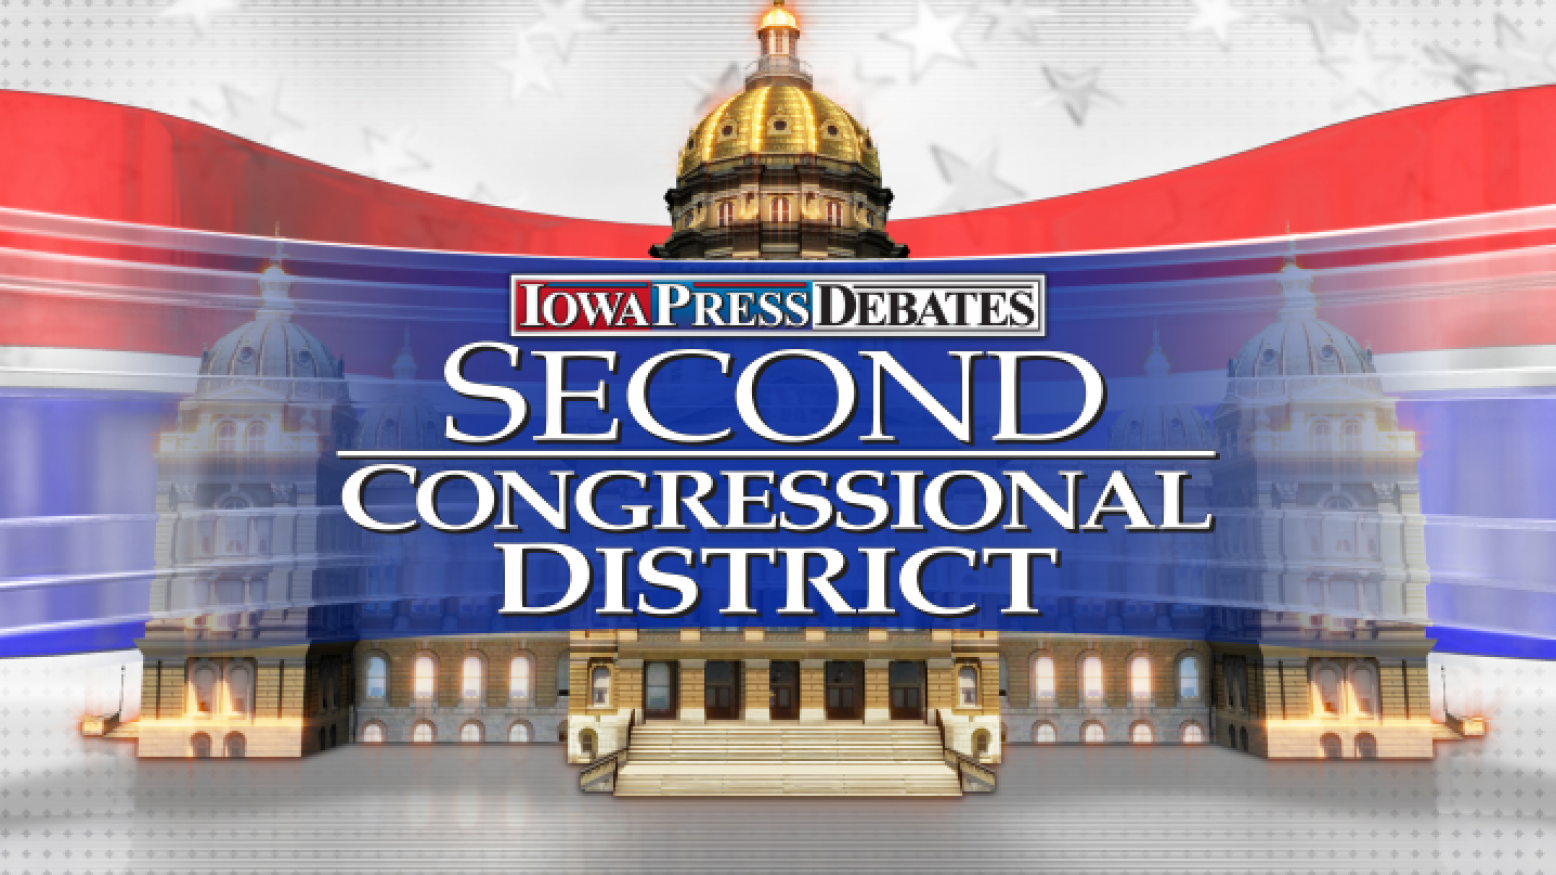 An illustration of the Iowa Capitol with a background of red, white and blue. In front of the Capitol is the logo for Iowa Press Debates: Second Congressional District.